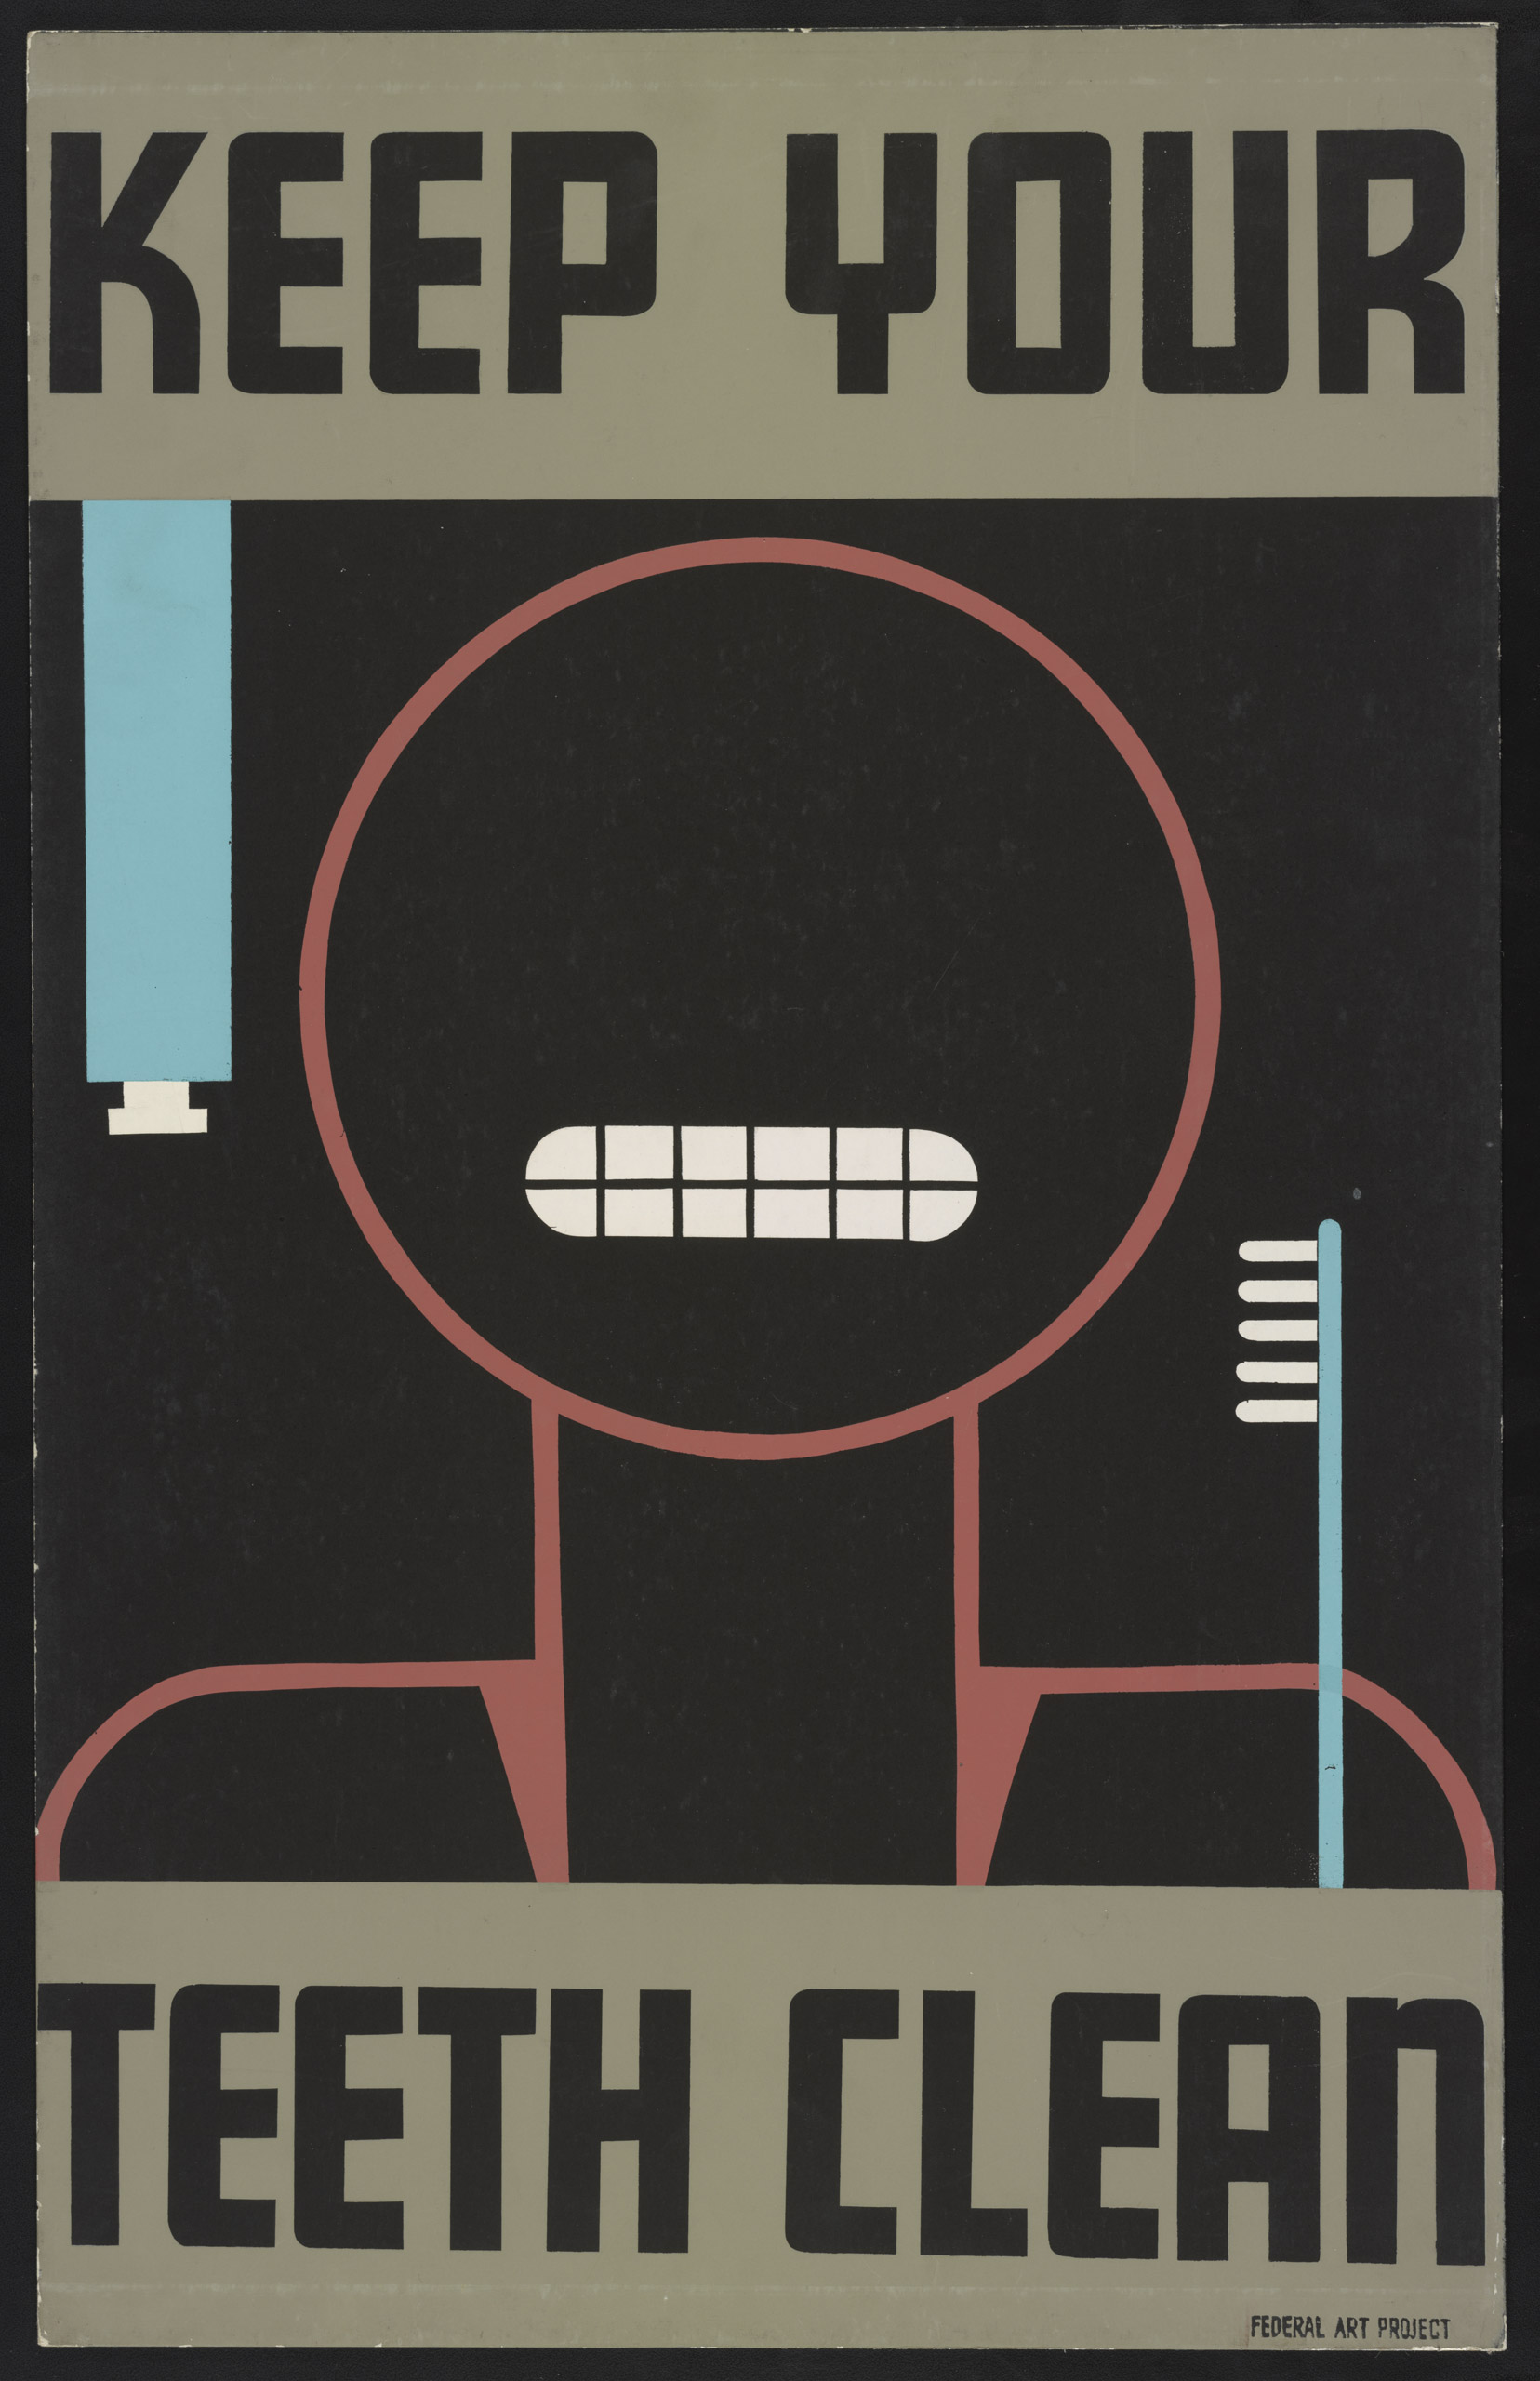 Poster promoting good oral hygiene, showing stylized face, toothbrush and toothpaste. Created betweeb 1936 and 1938.